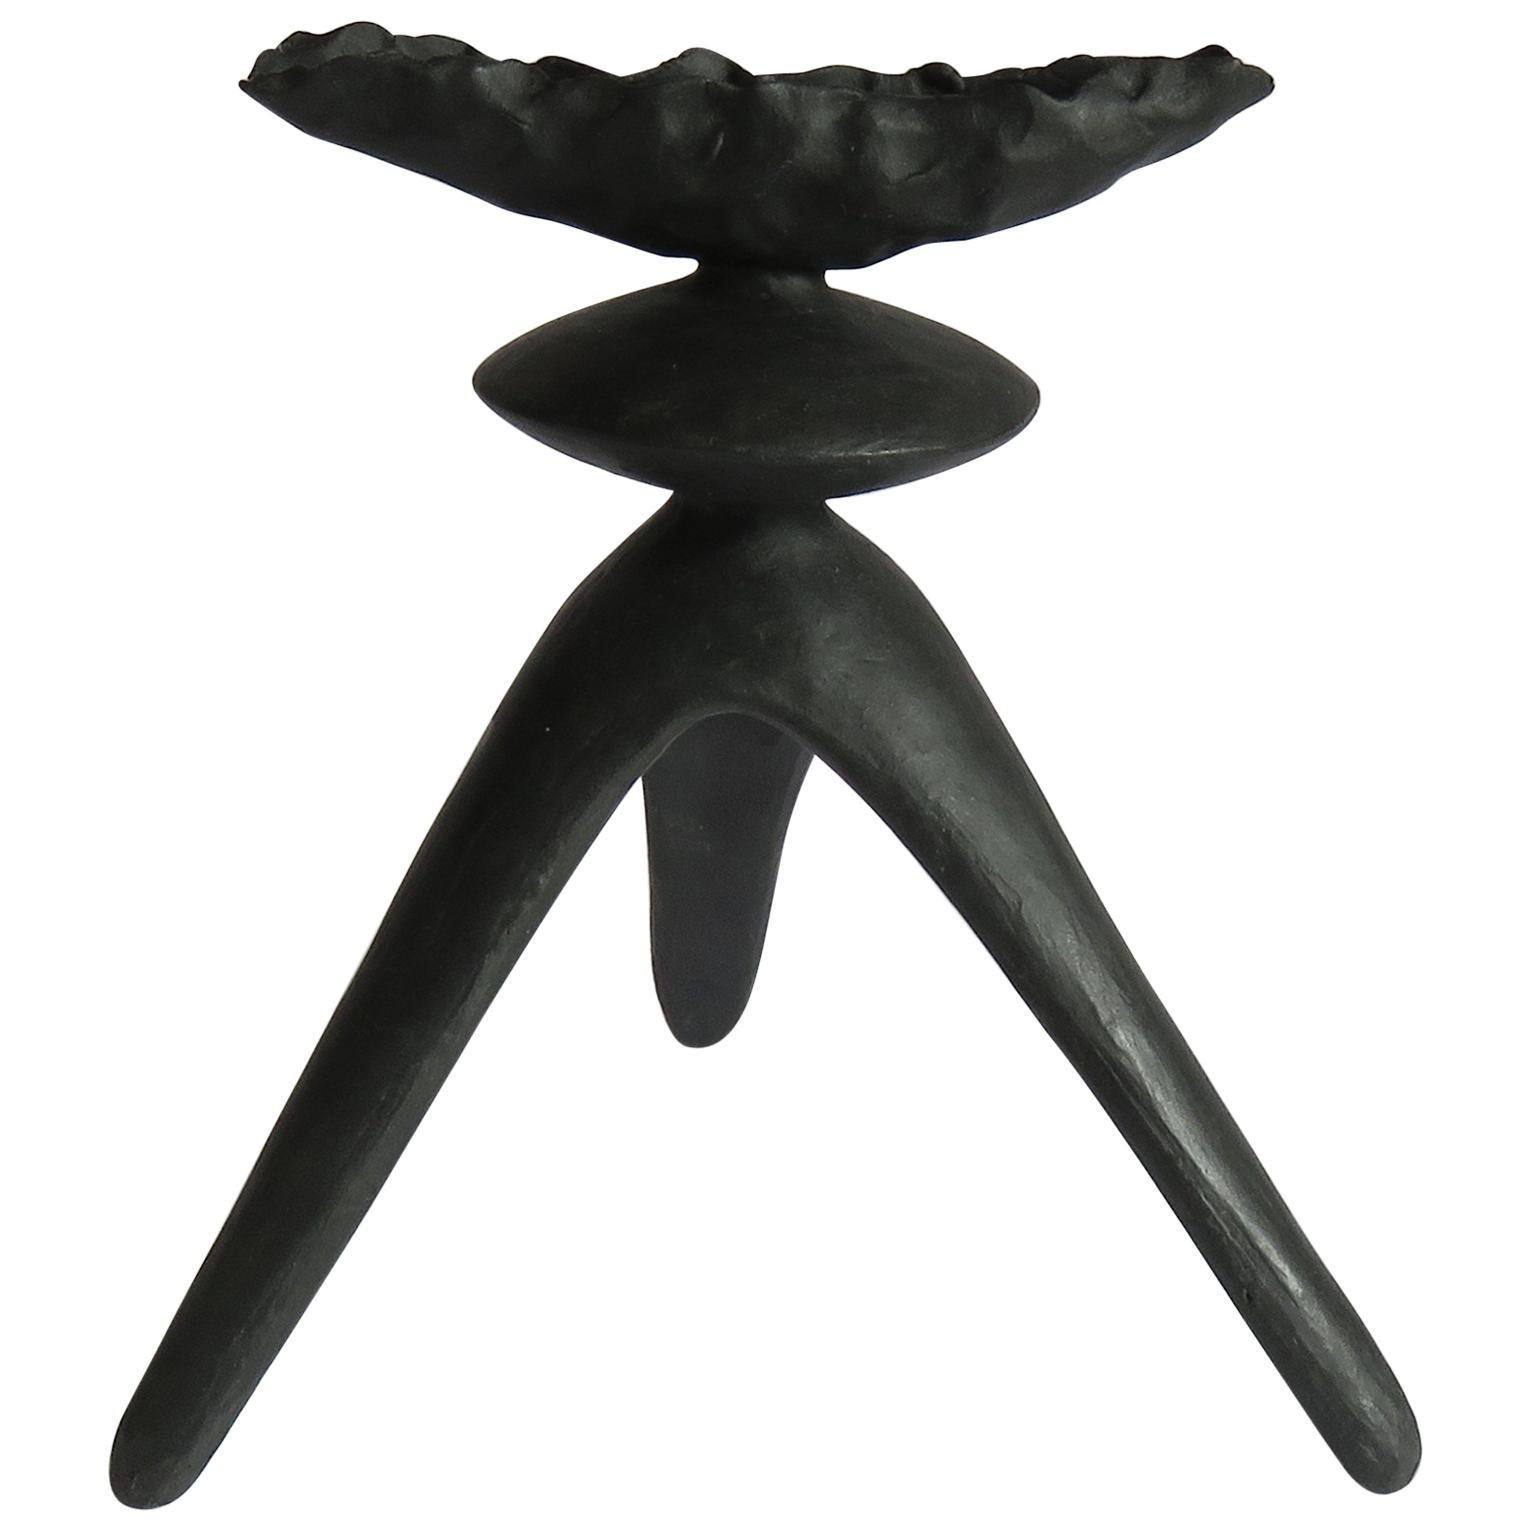 Crimped-Top Black Ceramic TOTEM with Middle Sphere on Tripod Legs, Hand Built